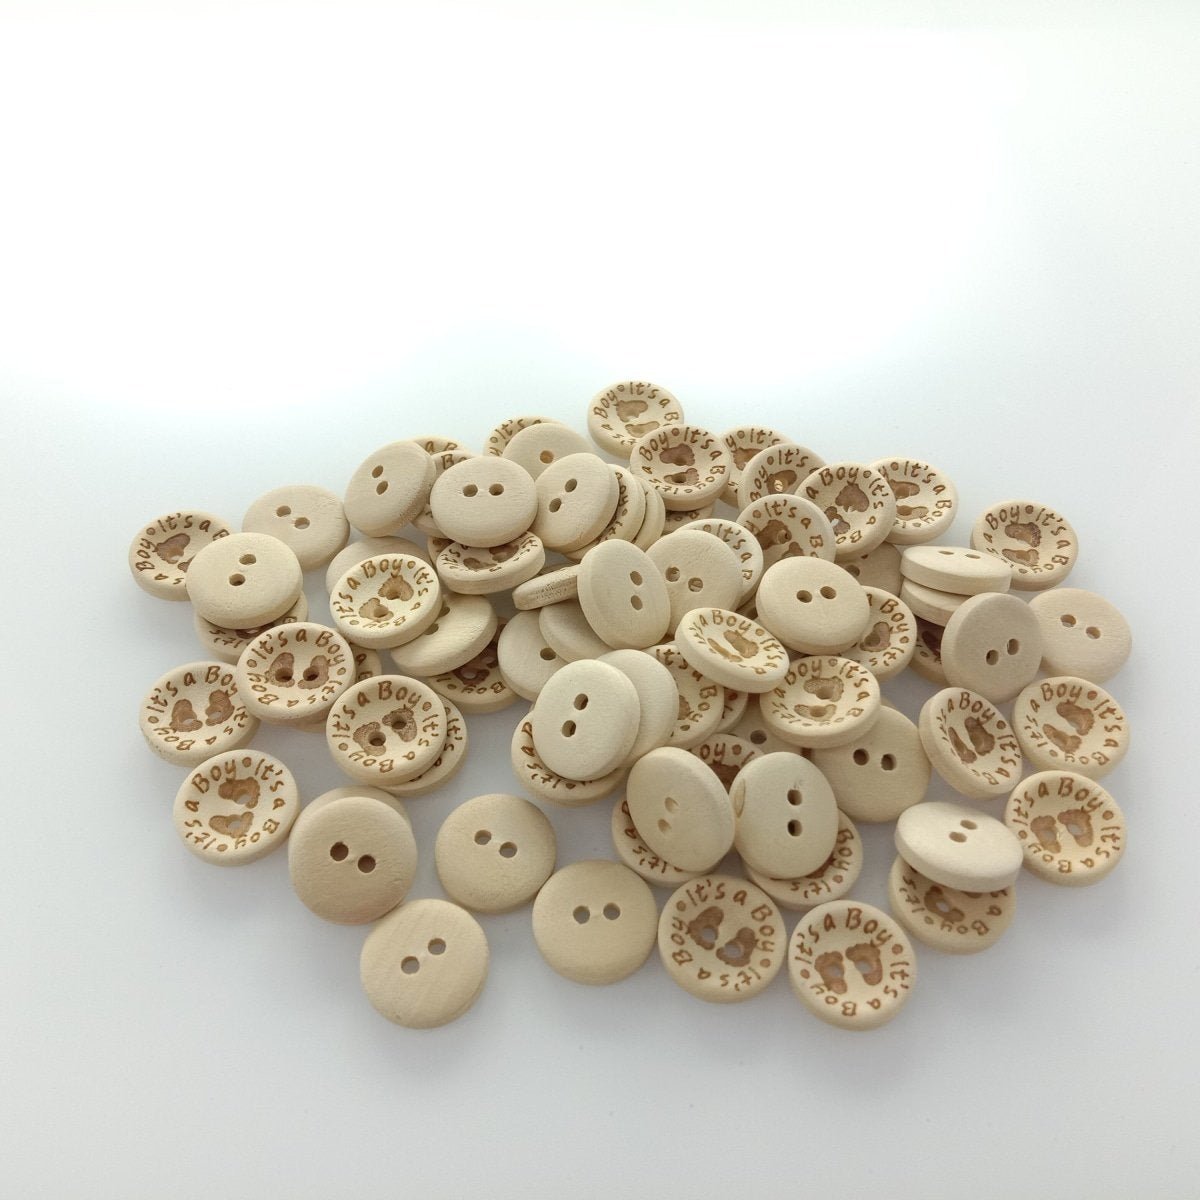 15/20/25mm It's a Girl/Boy Wooden Button Natural Wood Sewing Baby Clothing Buttons - It's a Boy 15mm 50pcs - - Asia Sell